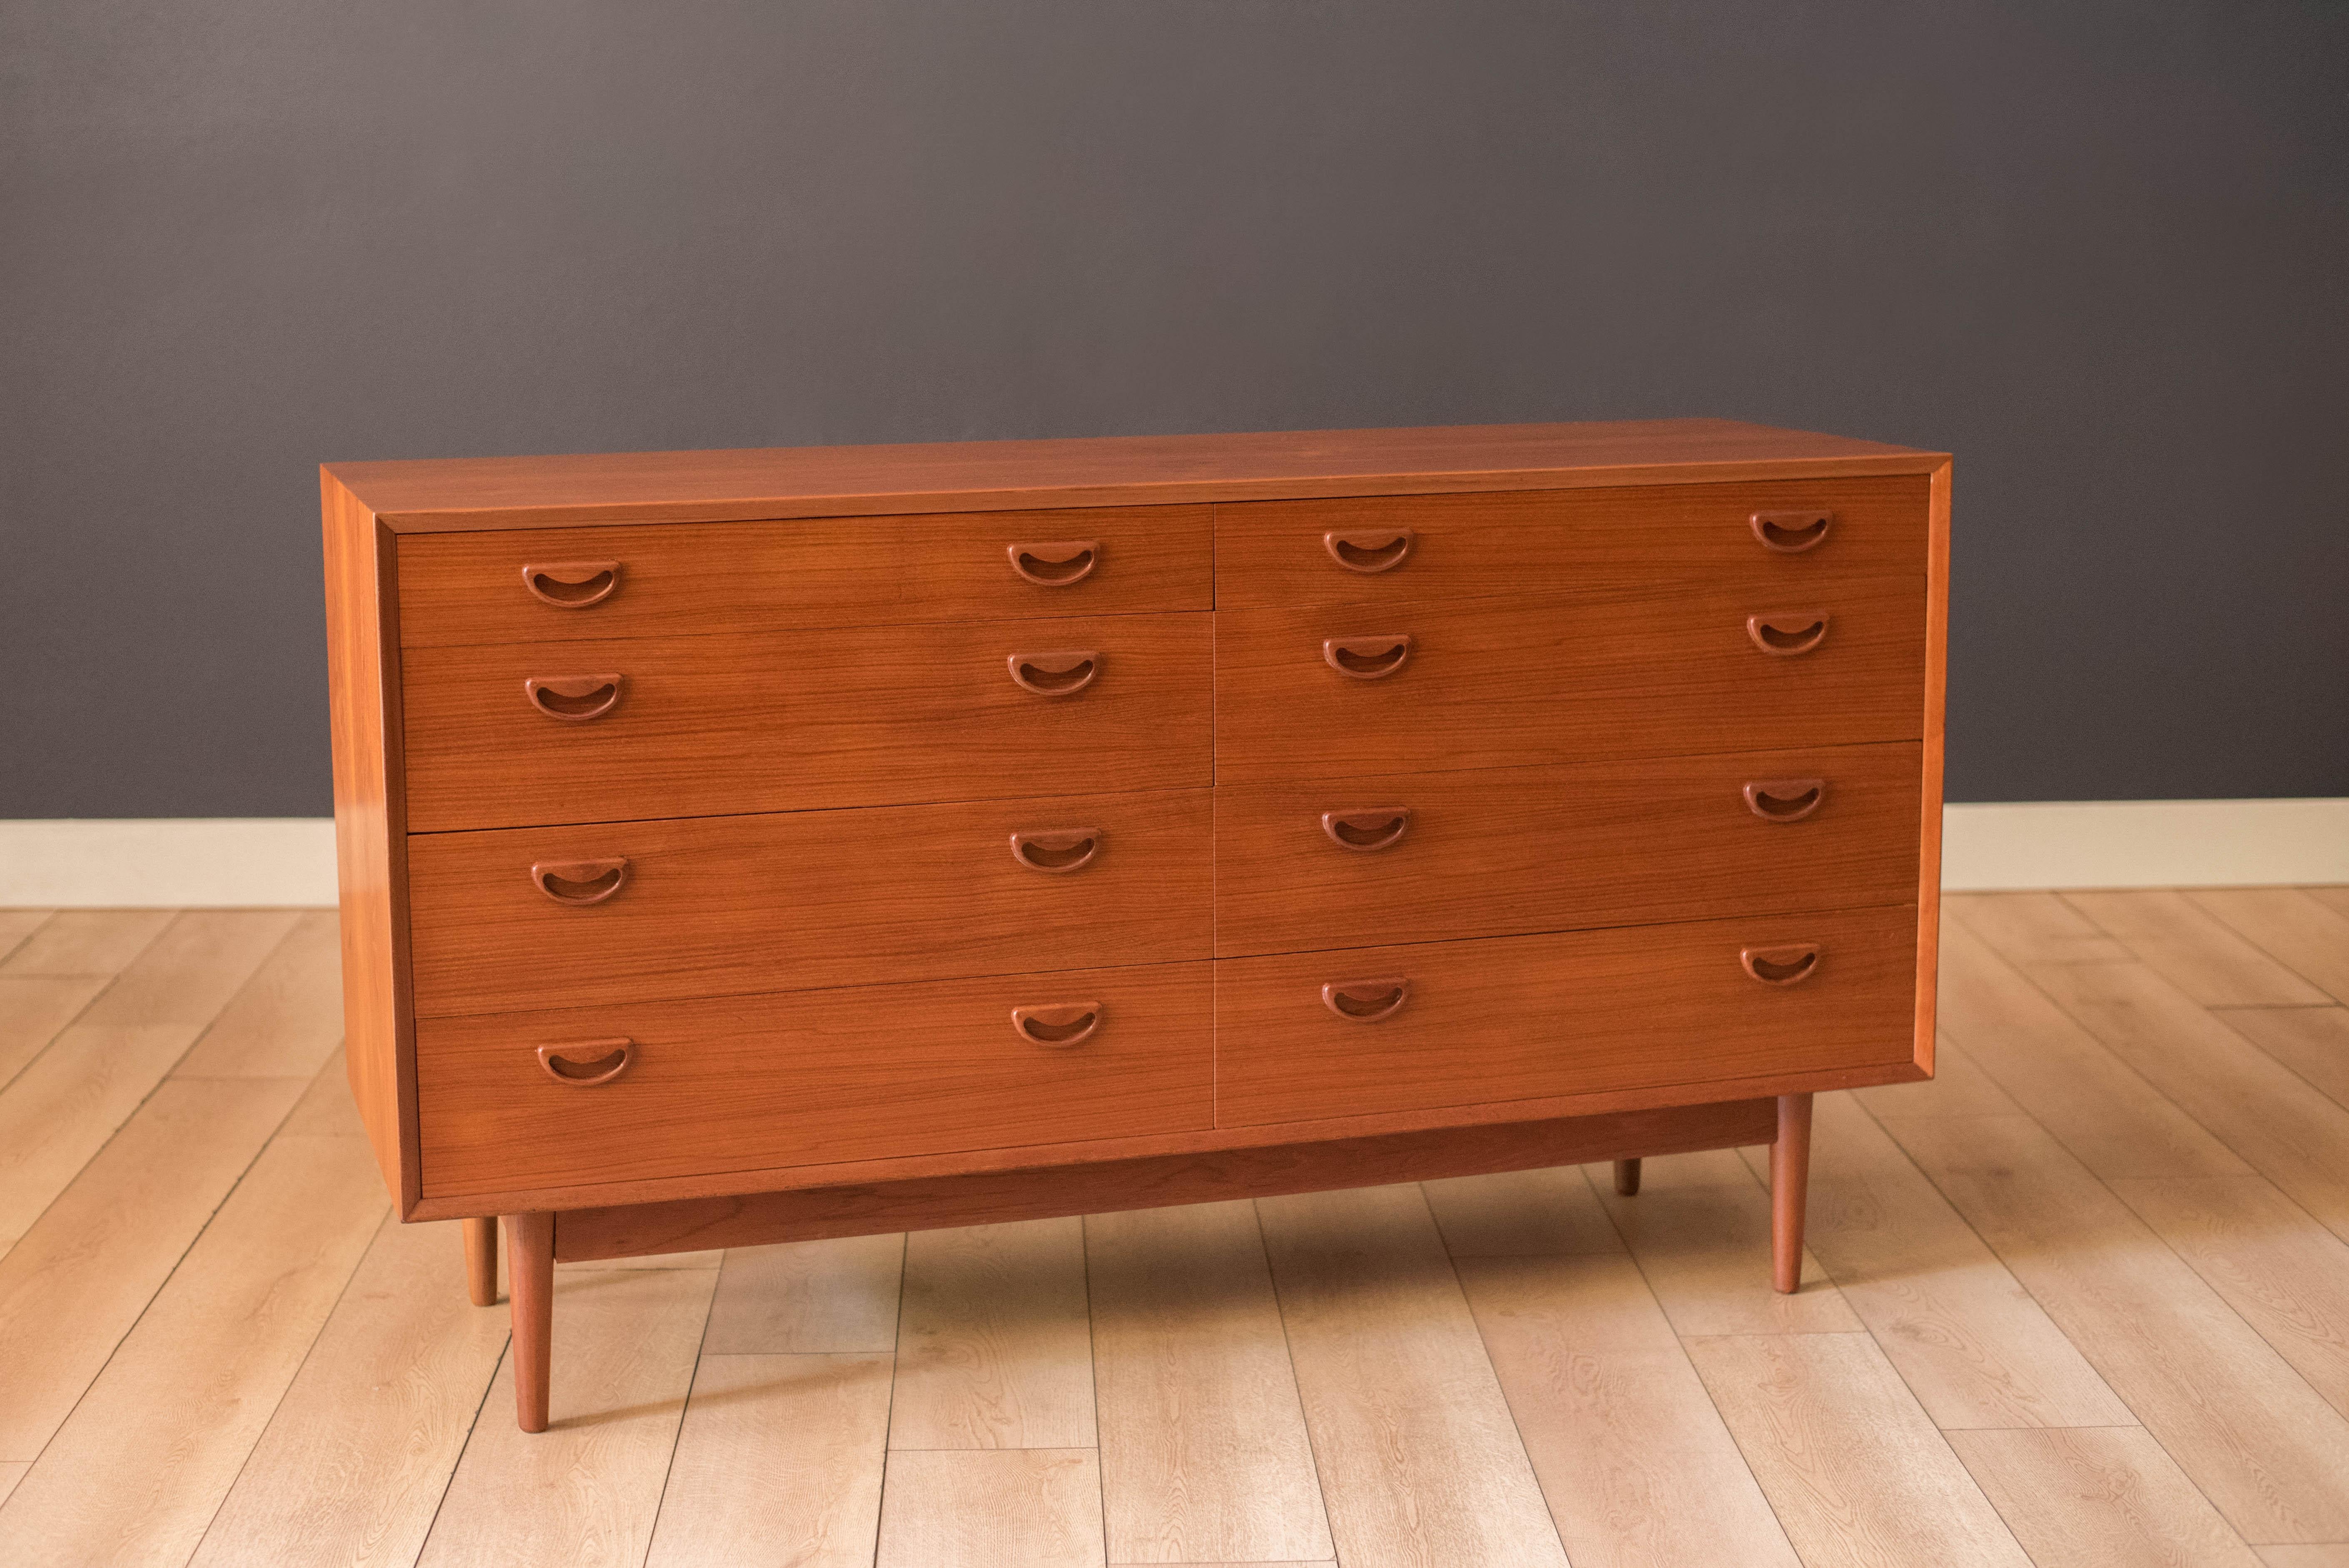 Mid century modern lowboy dresser in teak circa 1960's. Features natural bookmatched grains and solid wood sculpted handles. Offers plenty of storage space equipped with eight drawers in various sizes. Matching tall highboy dresser available in